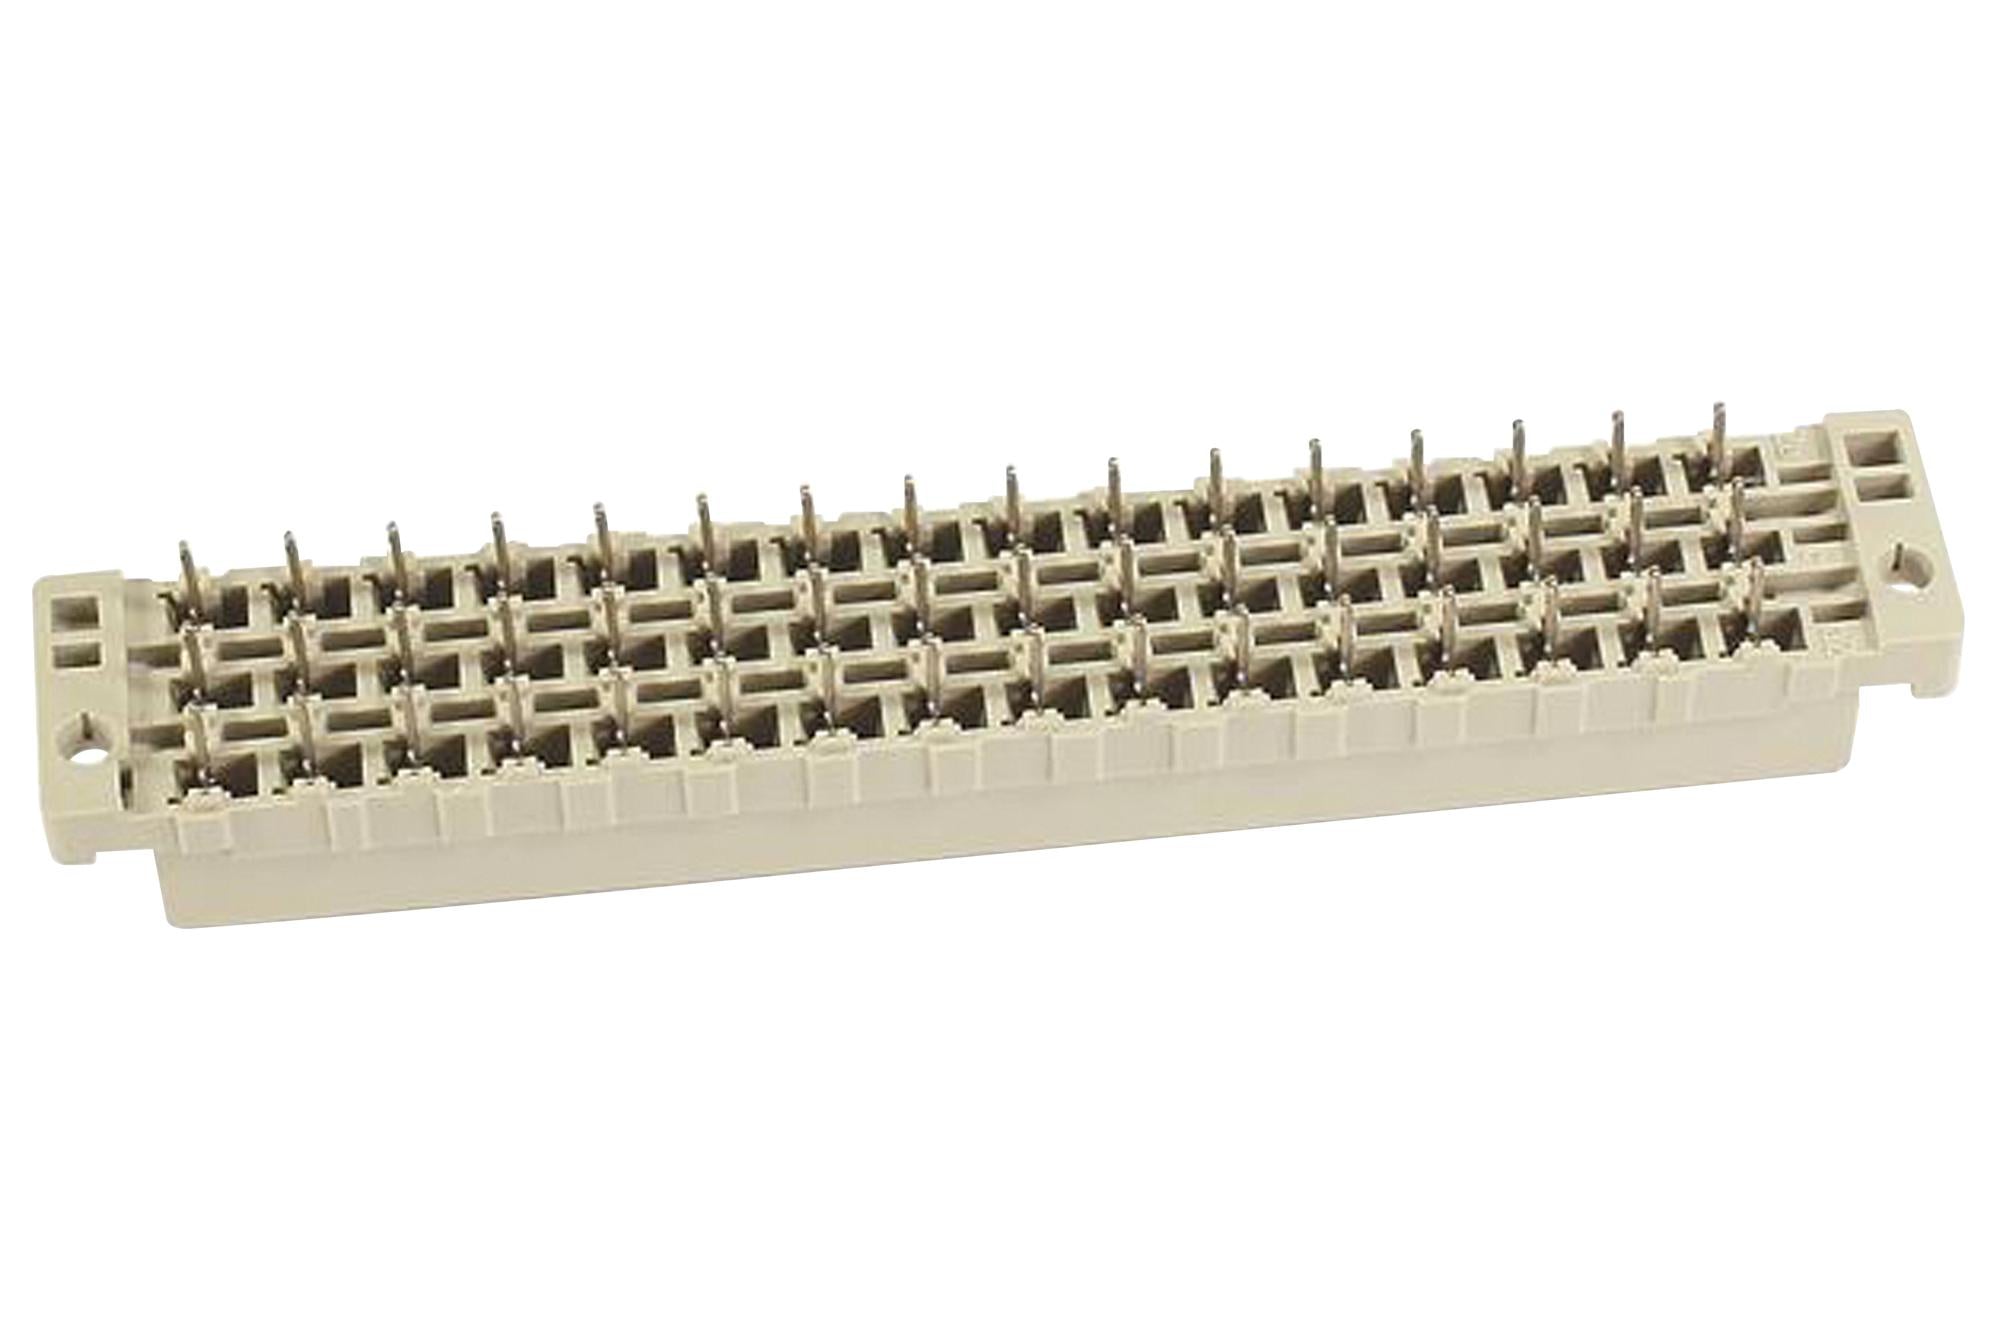 09052486831 CONNECTOR, DIN 41612, RCPT, 48P, 3ROW HARTING